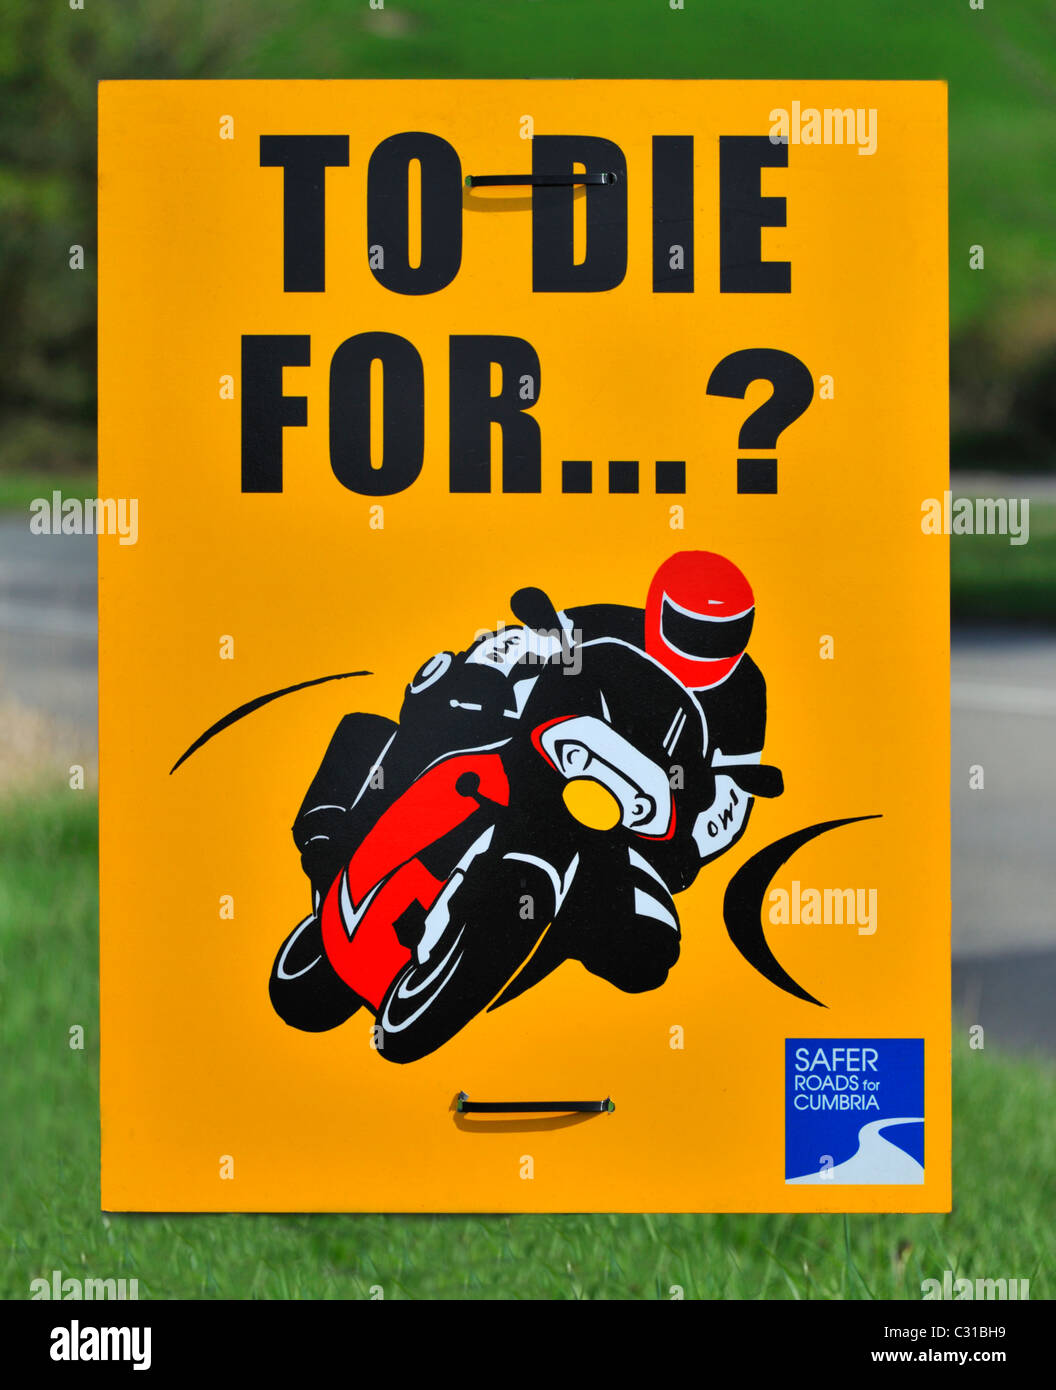 'TO DIE FOR ?'. Safer roads for Cumbria poster. Cumbria, England, United Kingdom, Europe. Stock Photo